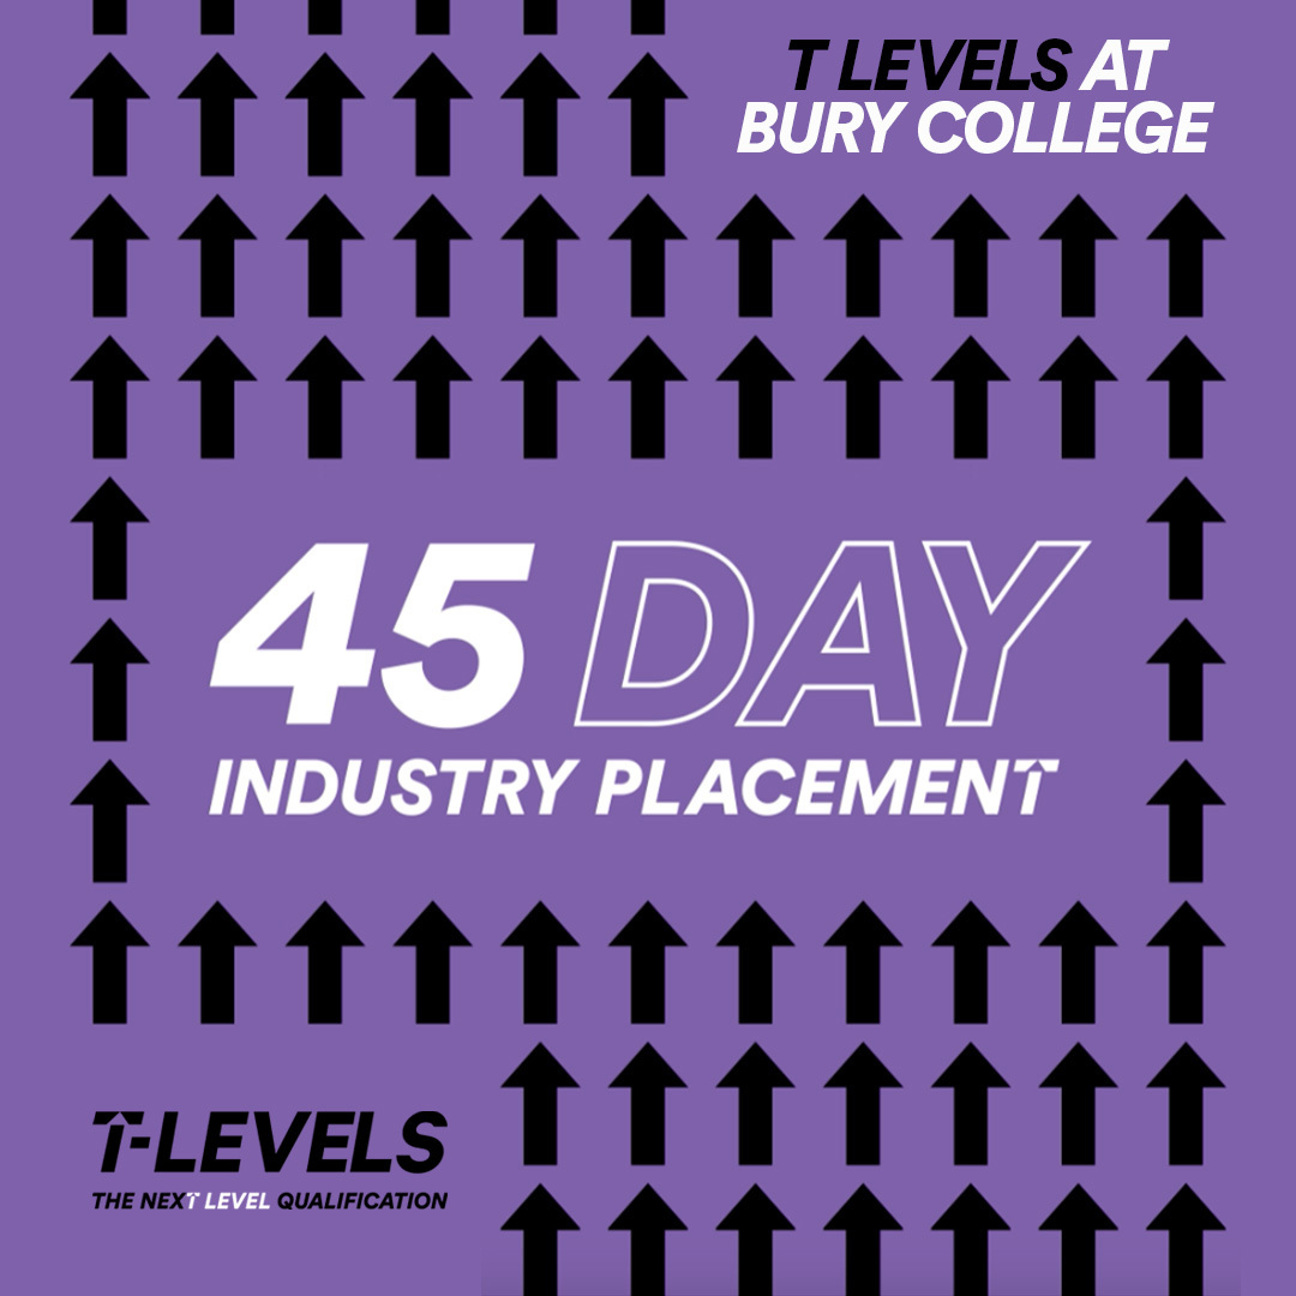 T Level 45 day industry placement